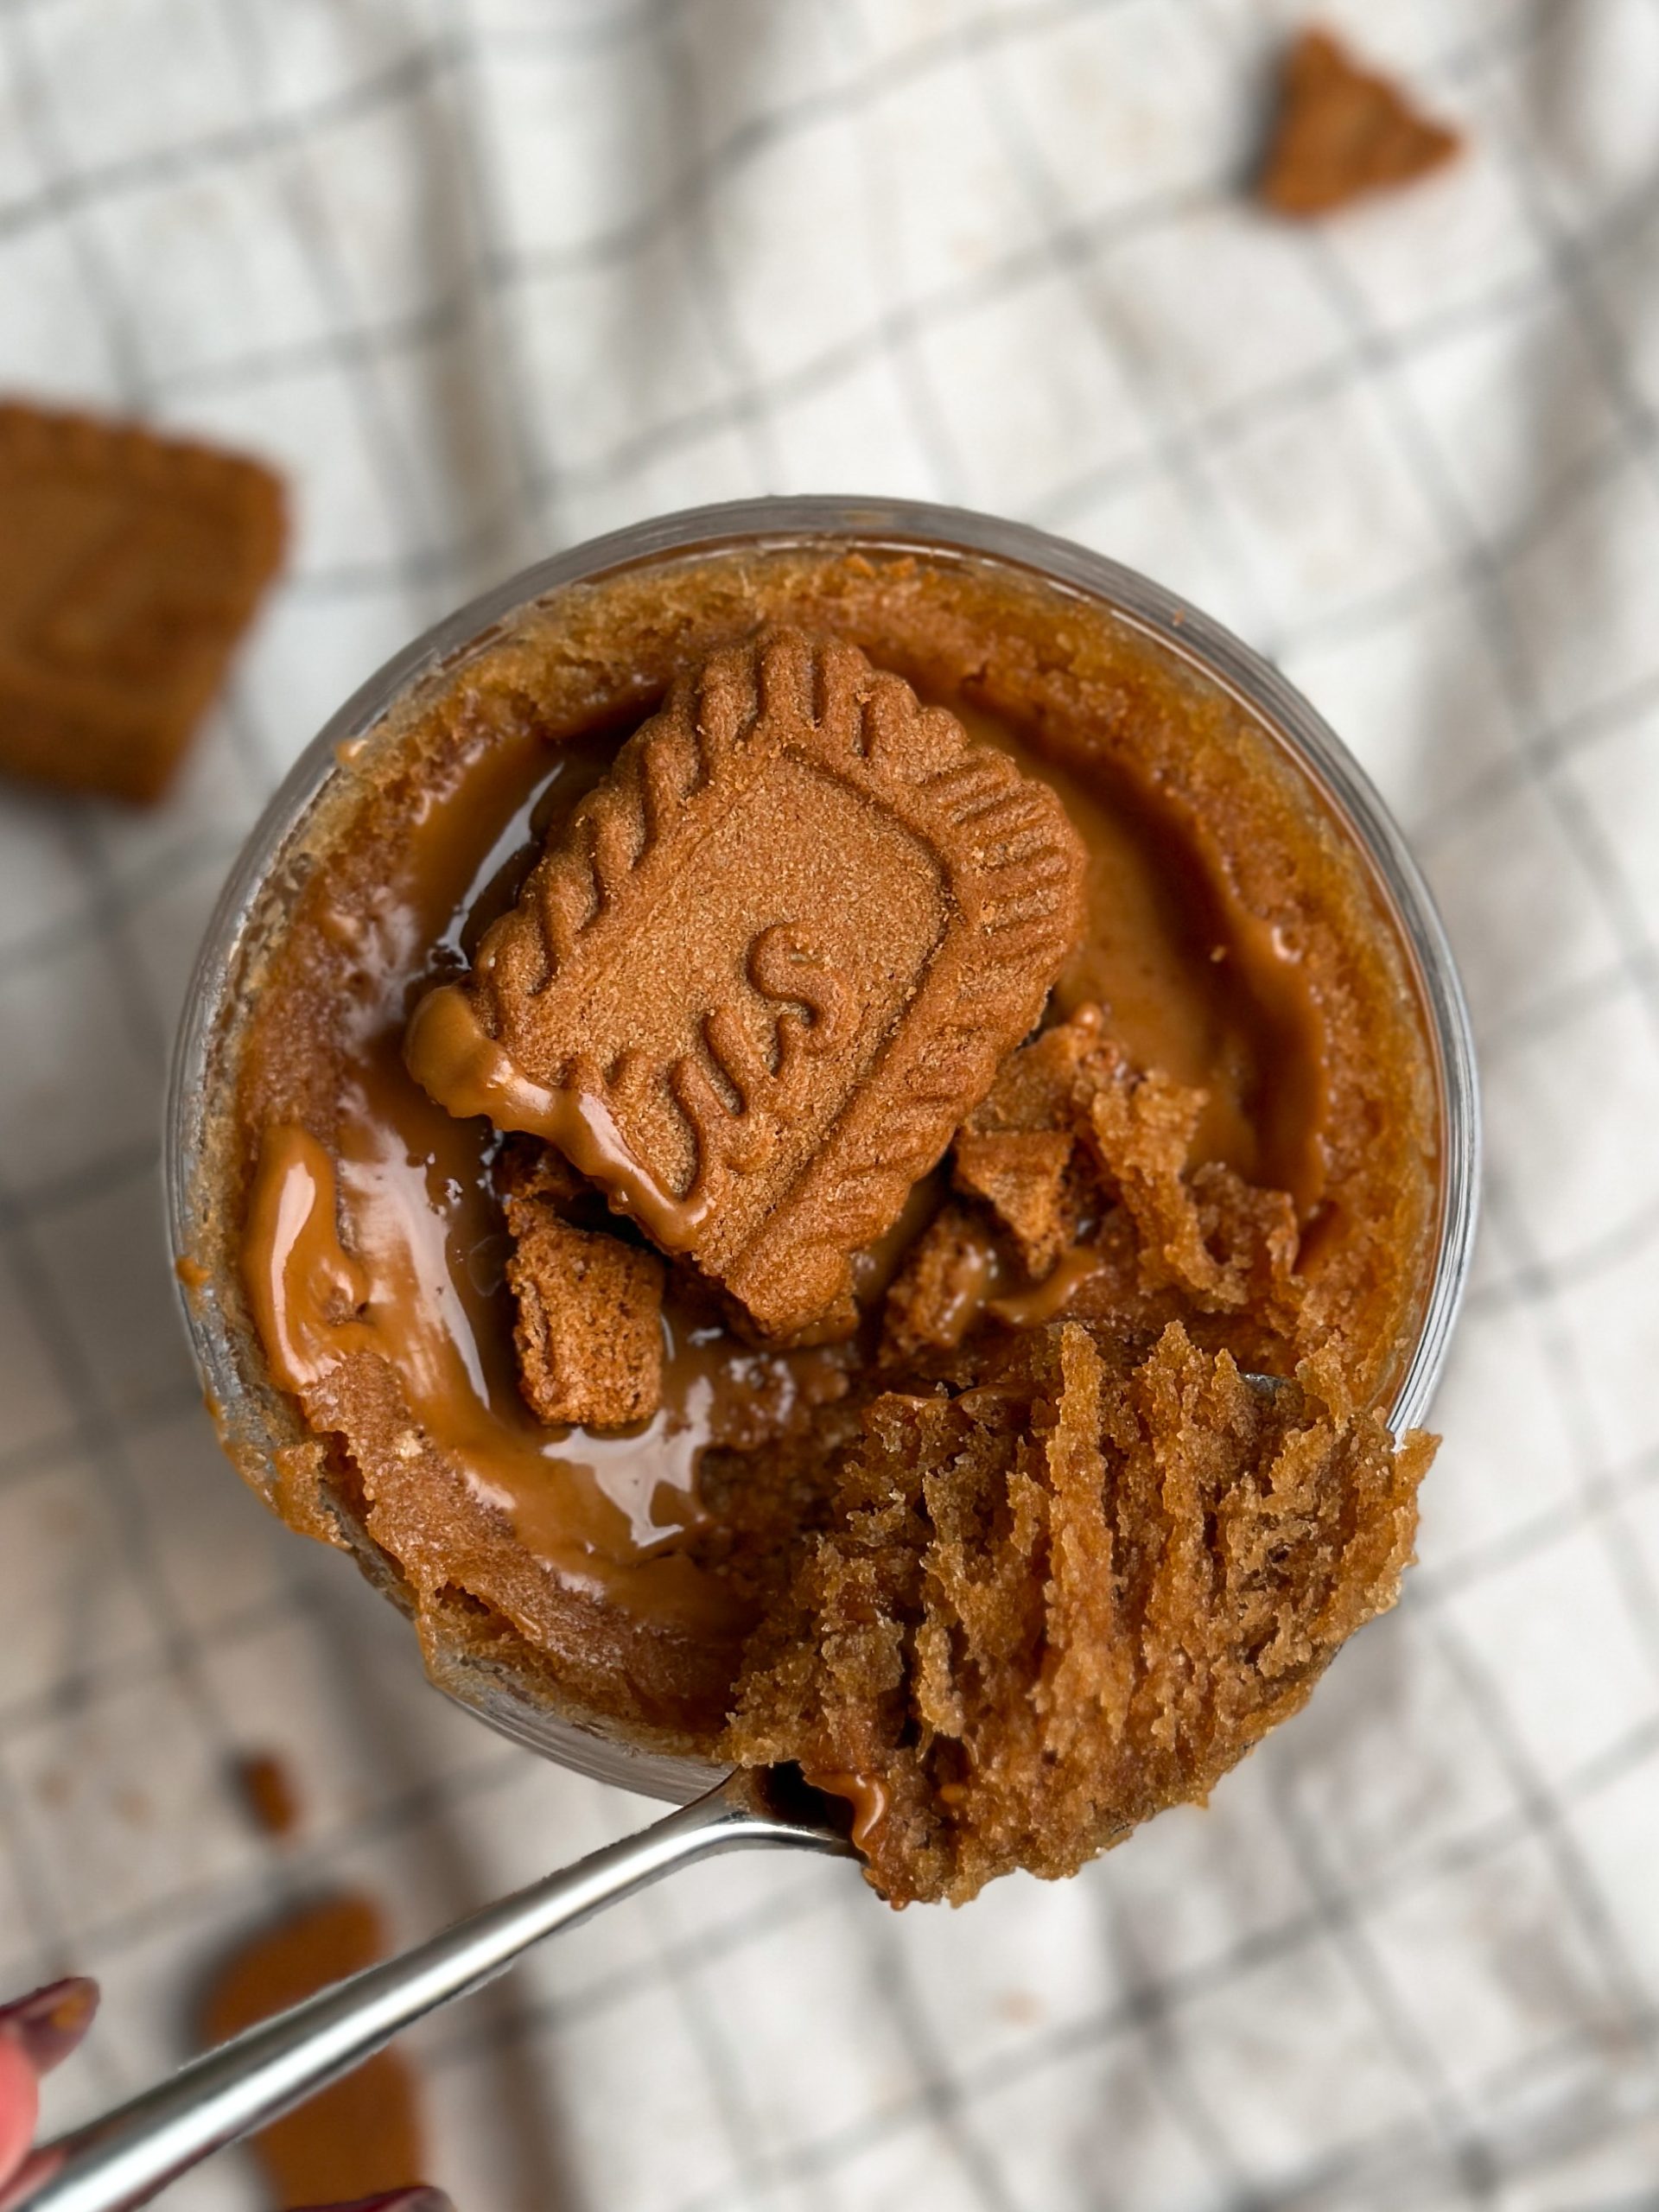 Overhead picture of a Biscoff mug cake in a glass mug, covered in biscoff cookie butter and crushed cookies. spoon taking out a bite revealing moist texture inside